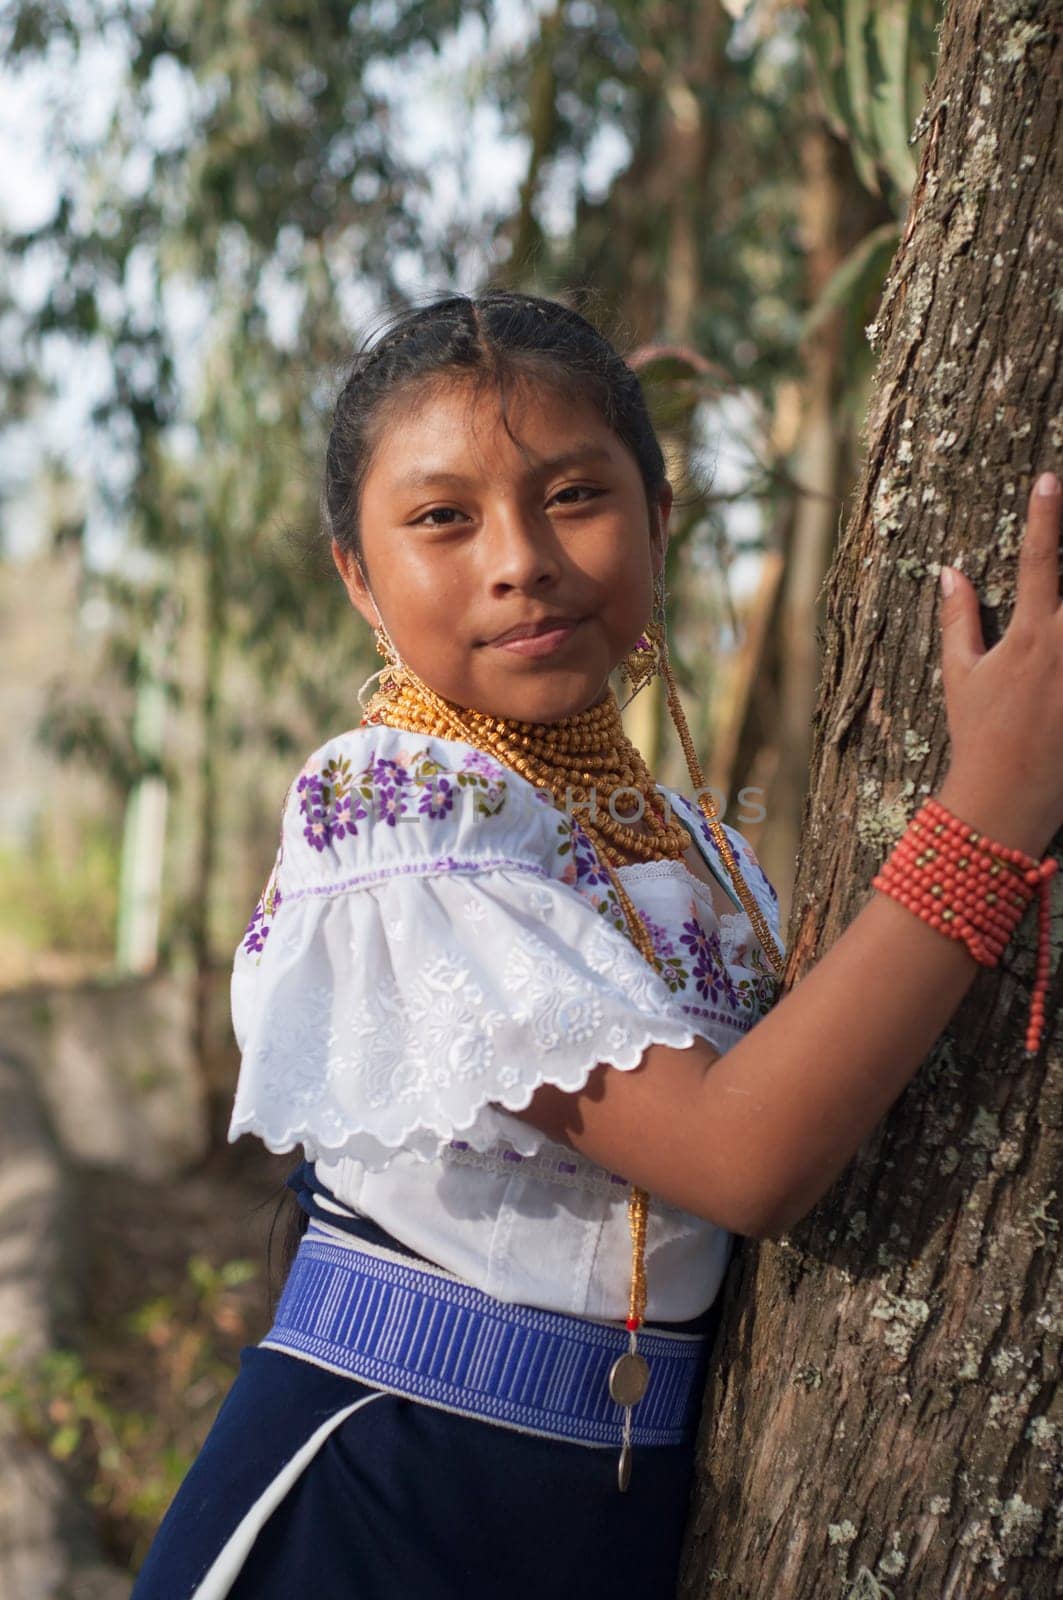 Portrait of Nature's Friend: Indigenous Youth and the Enchanting Woods by Raulmartin